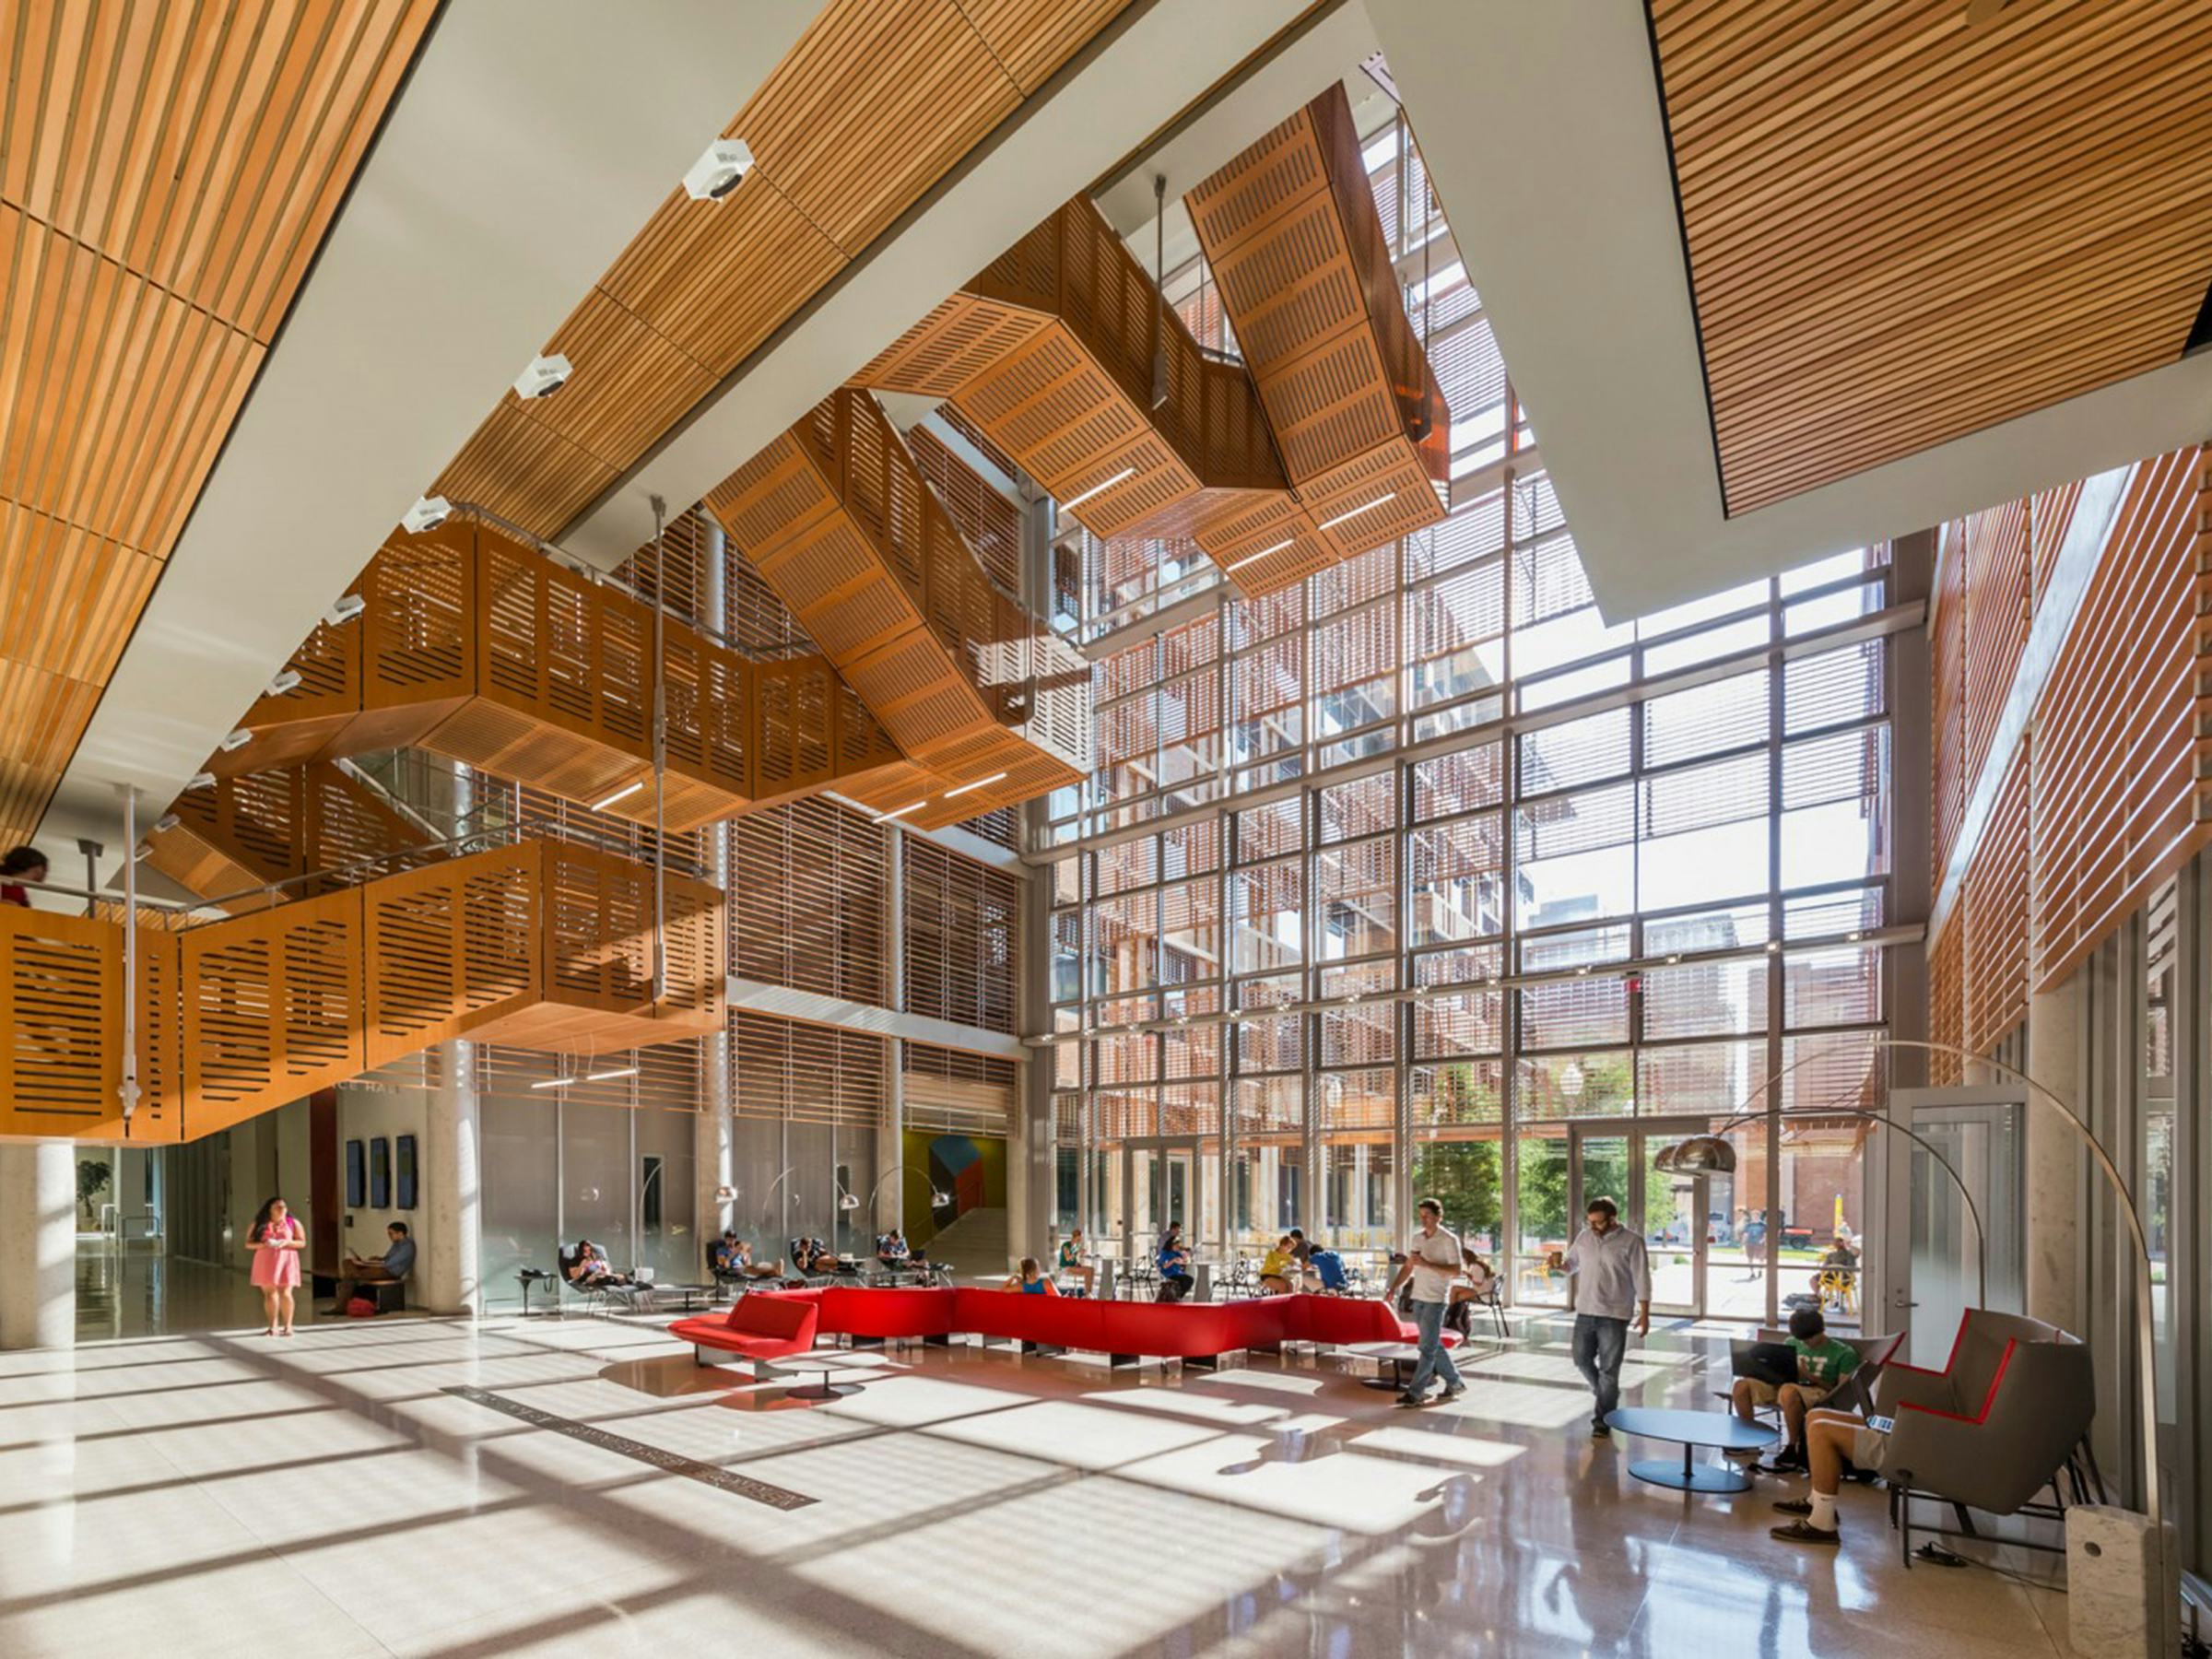 Photo of the atrium in the Gates - Dell Complex. Very high ceilings and large windows with abundant natural light and warm, wood-paneled interior accents.